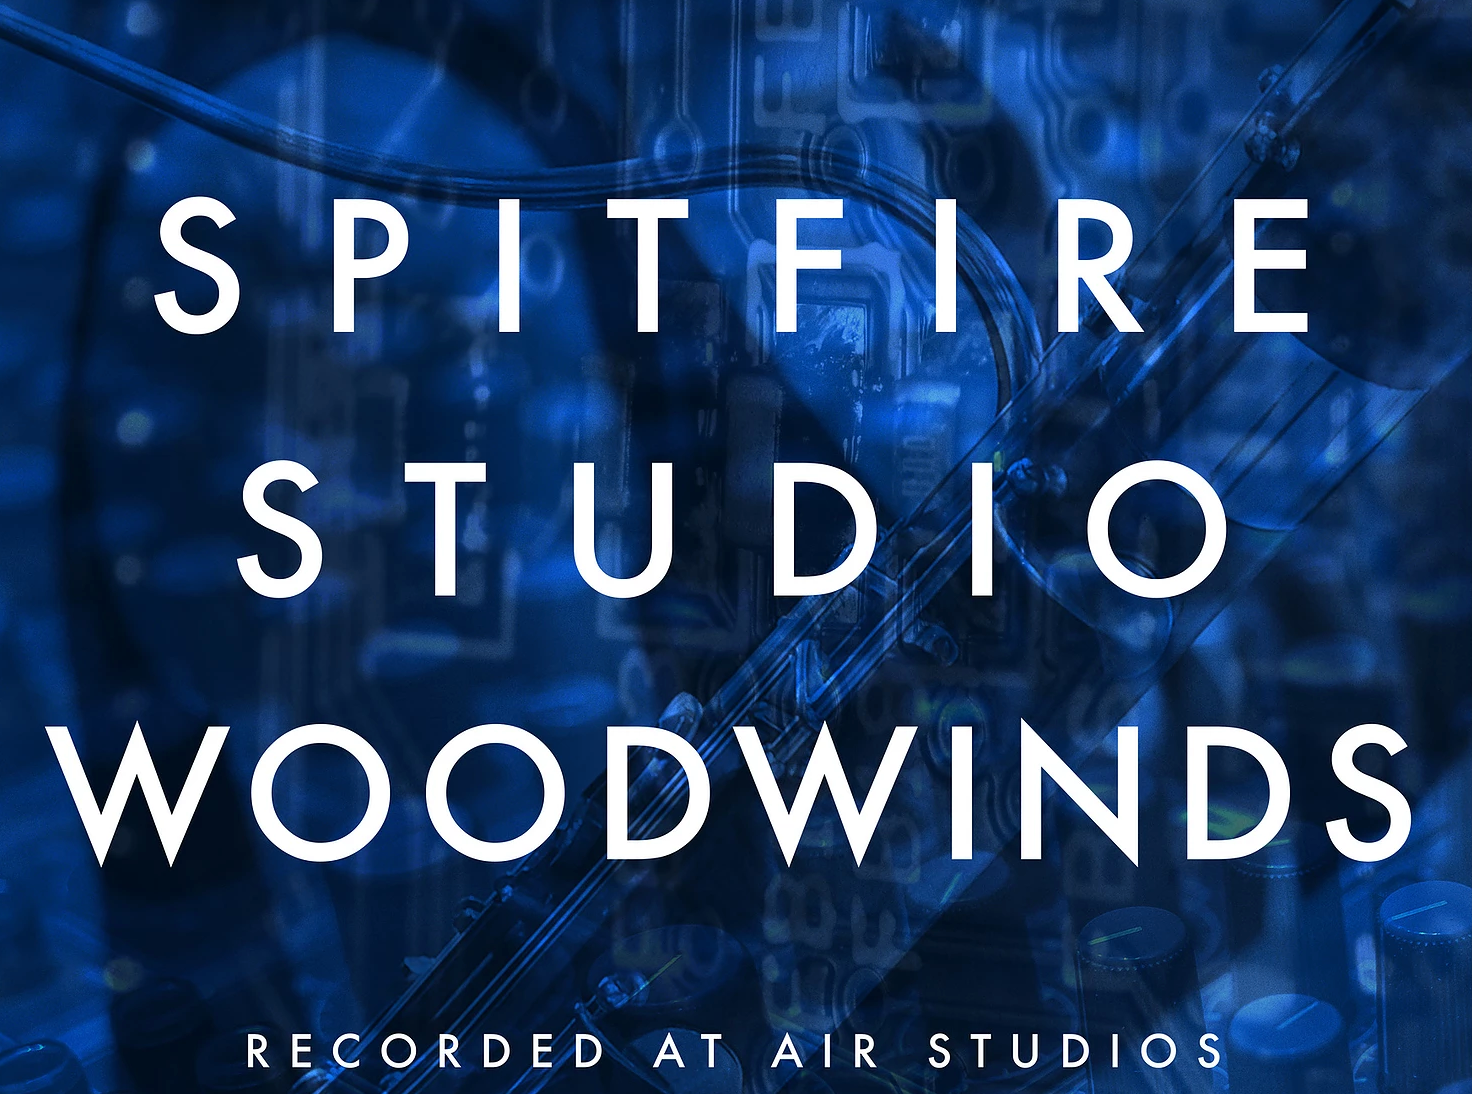 Review: Spitfire Studio Woodwinds by Spitfire Audio